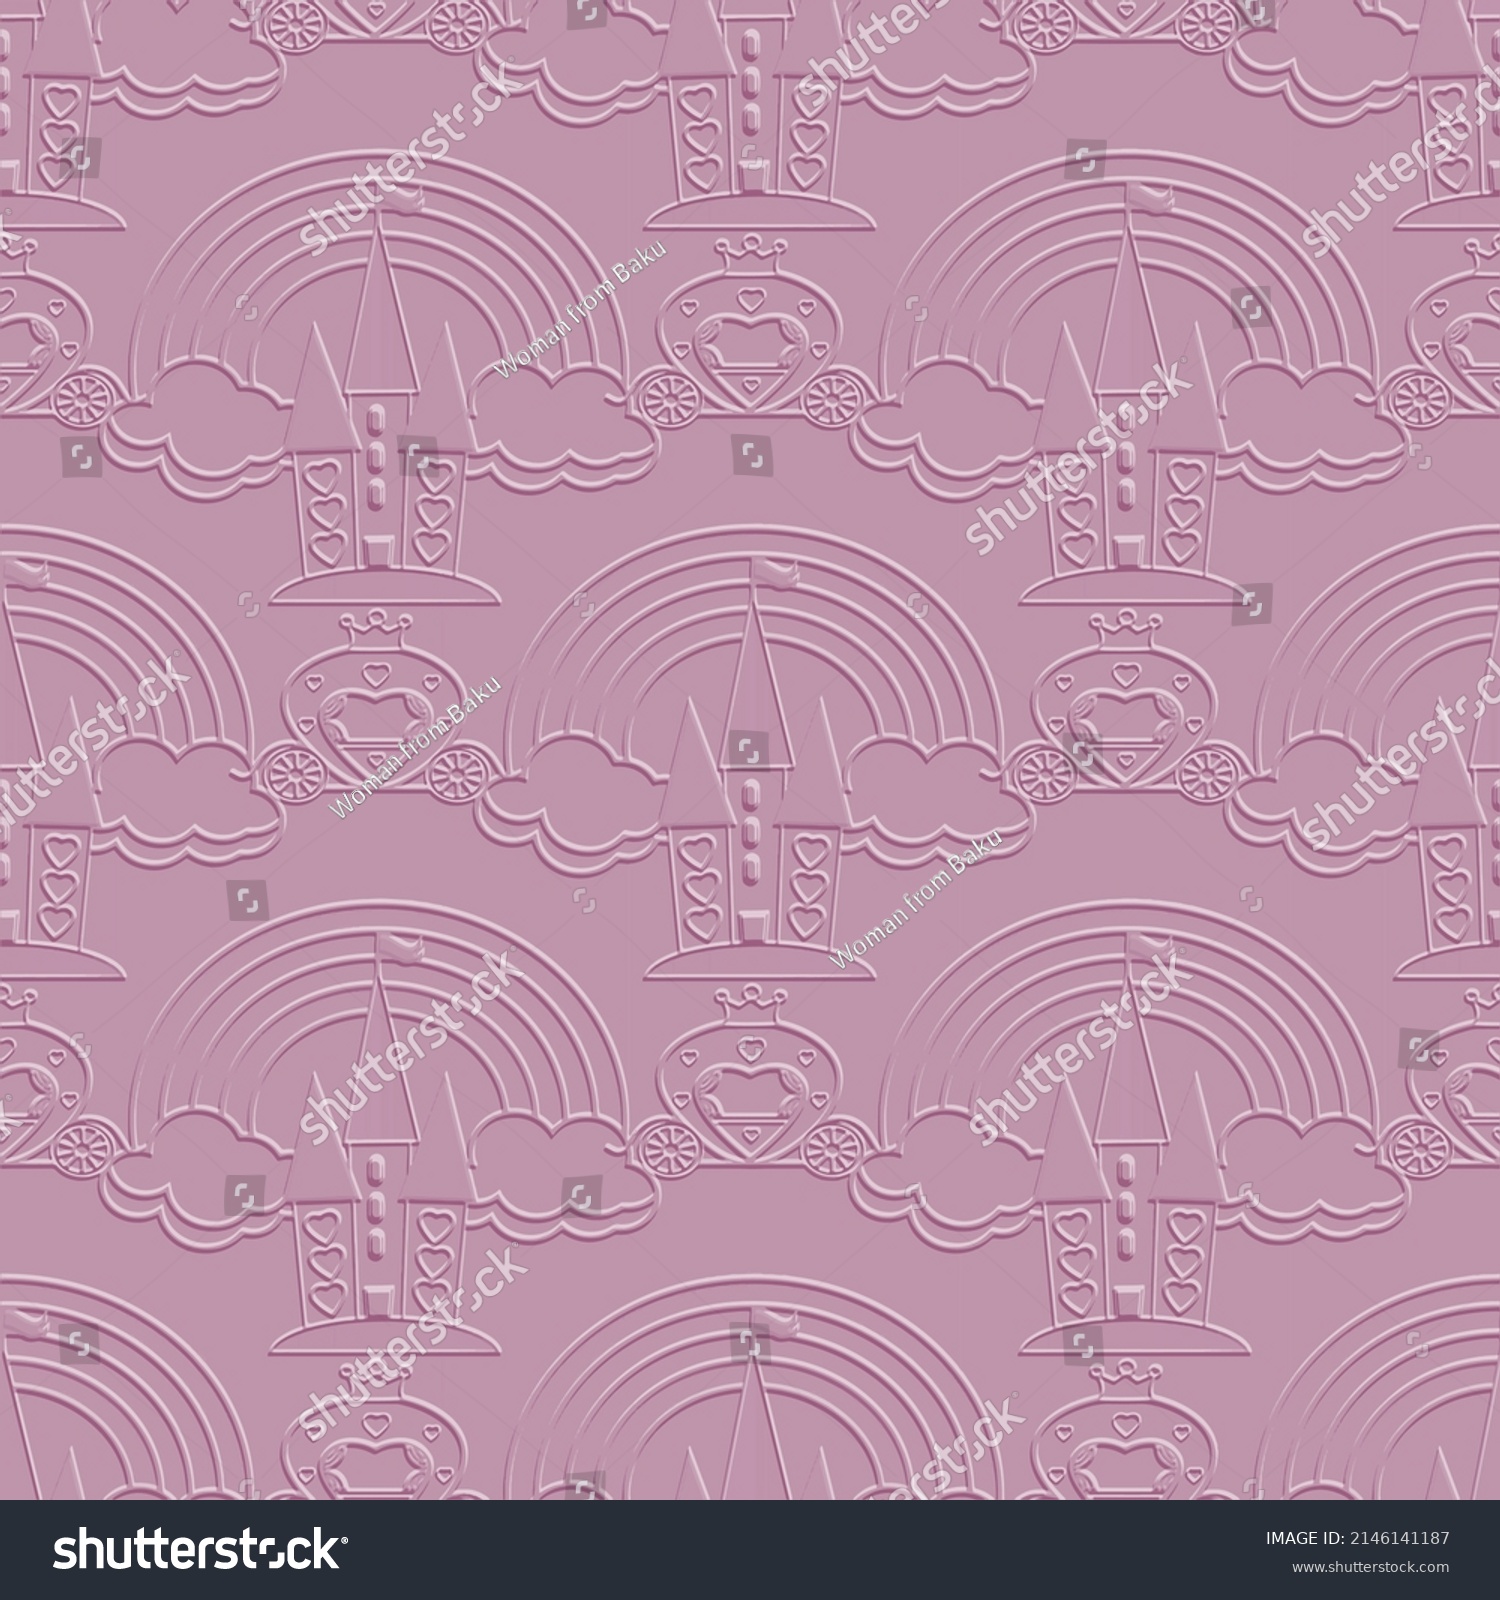 SVG of 3d embossed fairy tale seamless pattern background wallpaper illustration with fairytale princess castle, magic carriage, rainbow, clouds for little girls who dream of being princesses. Emboss texture svg